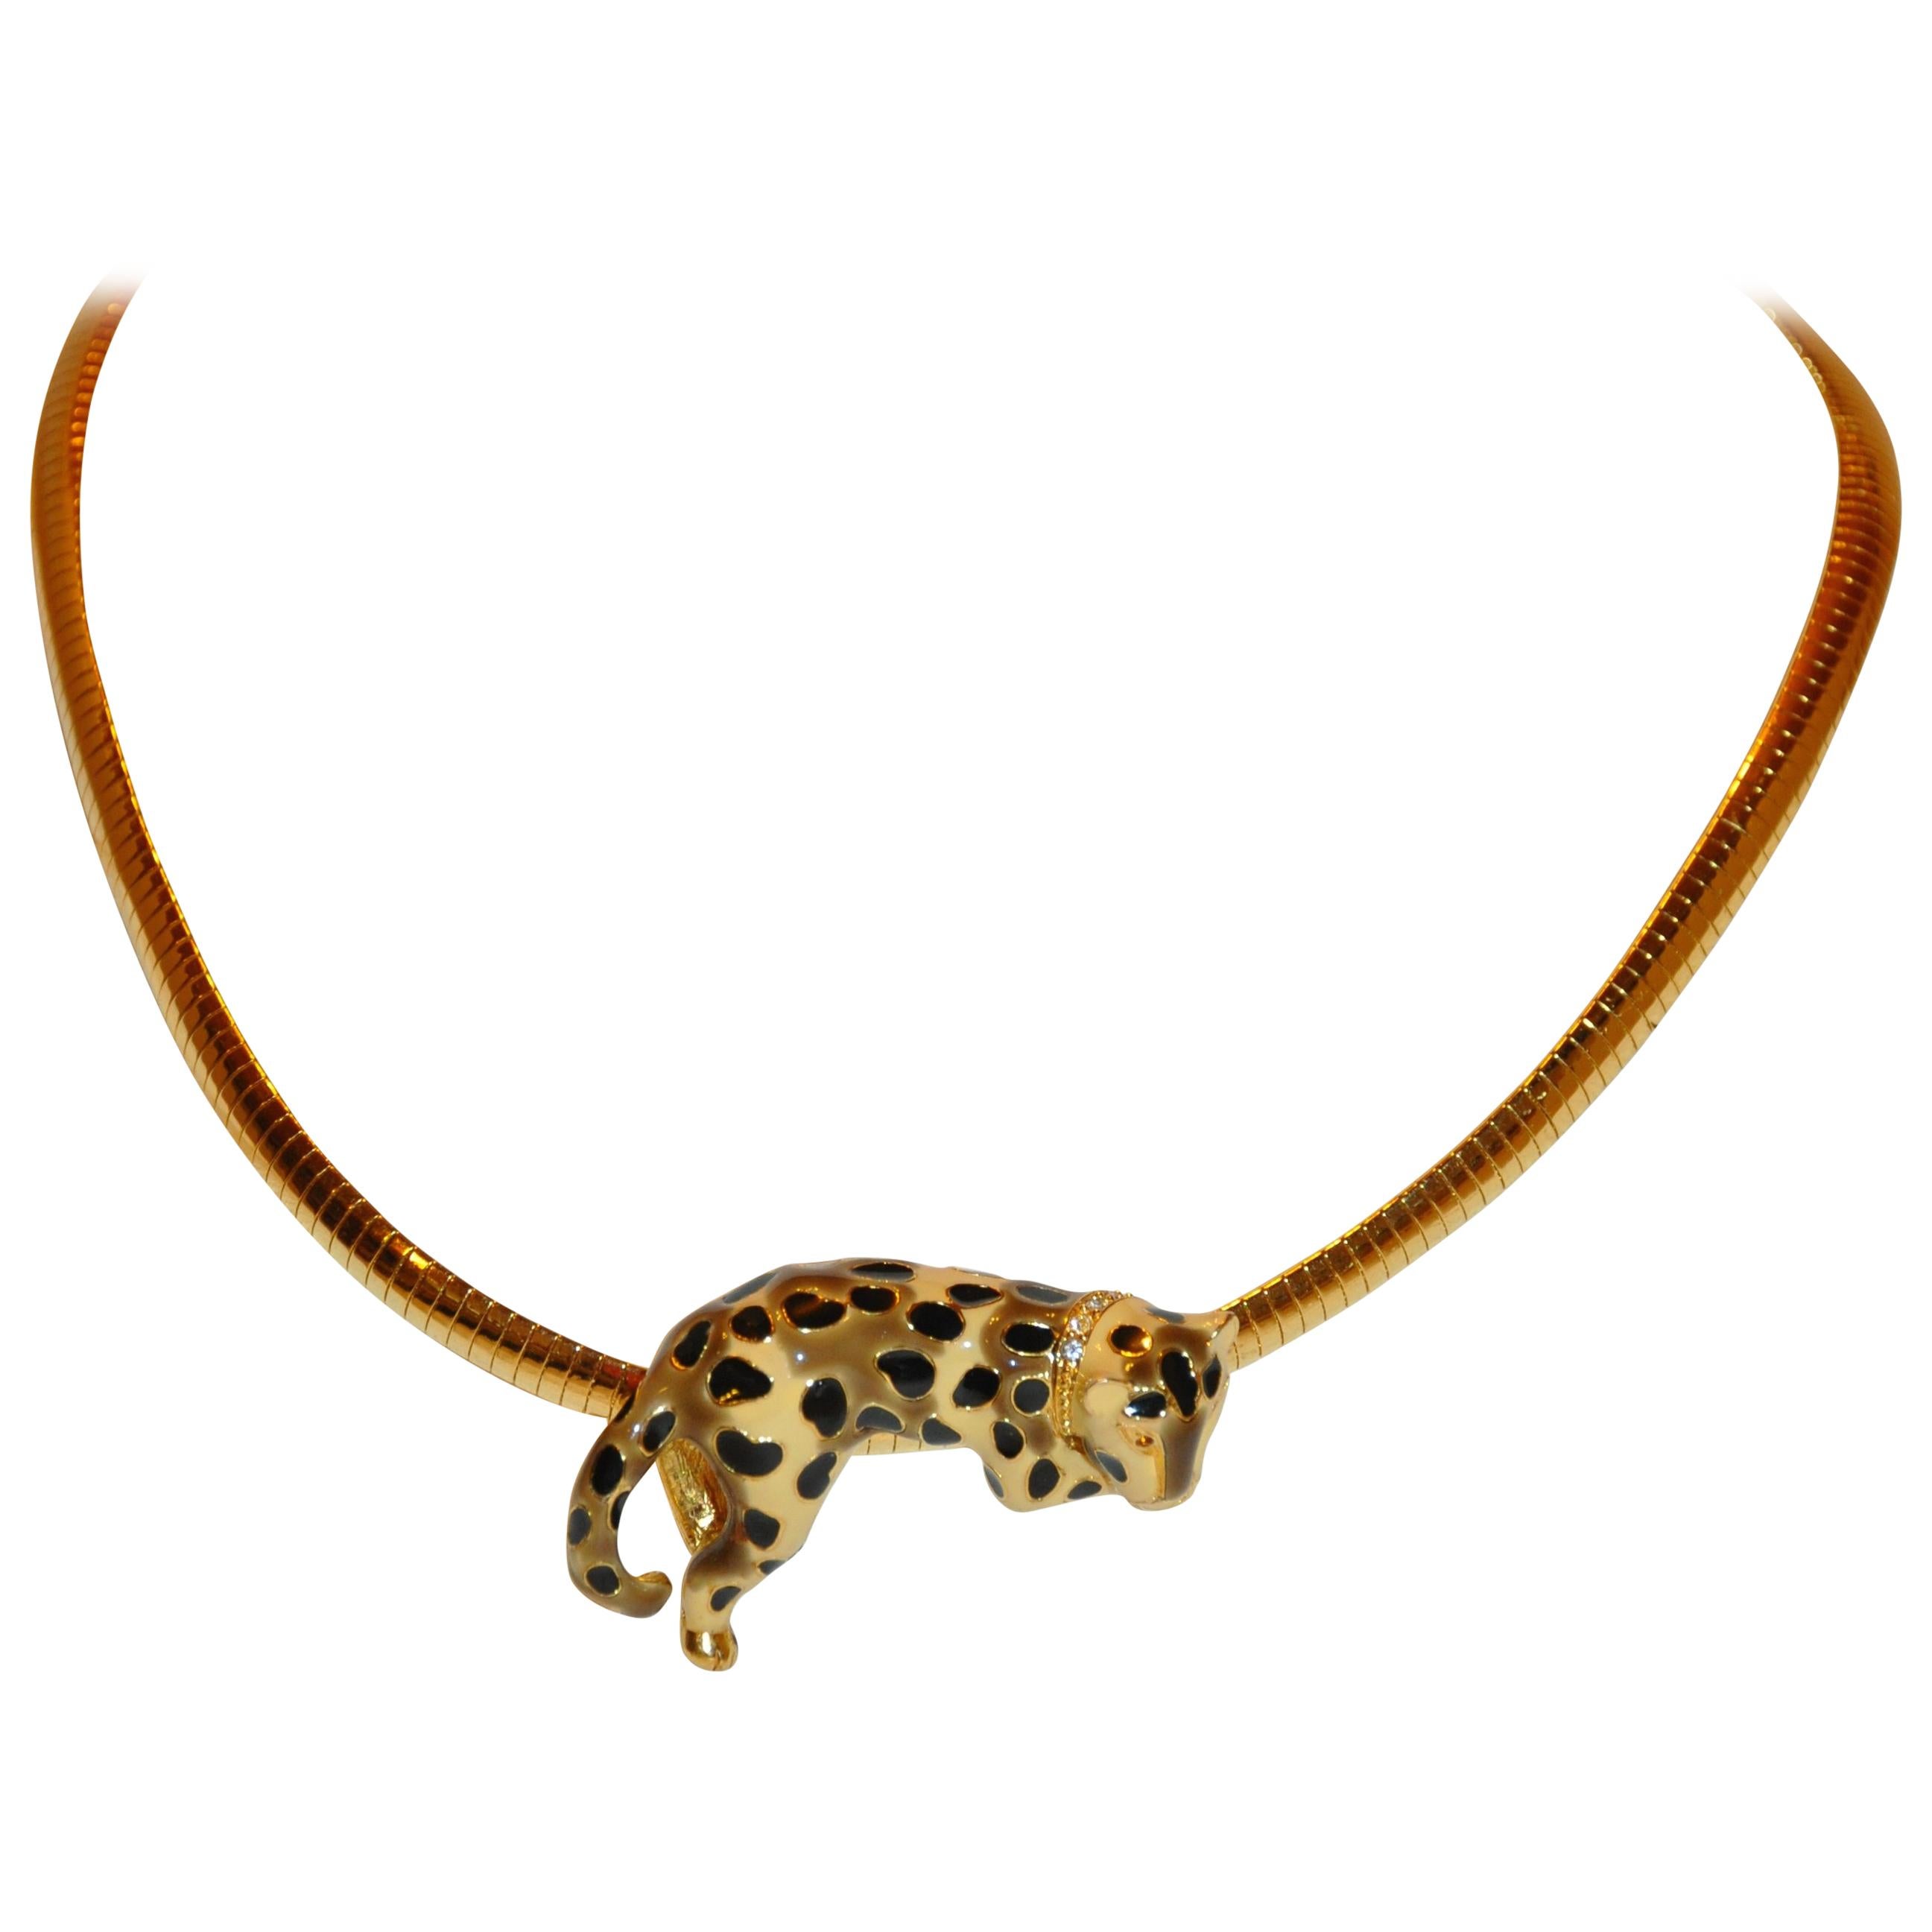 Kenneth Jay Lane Whimsical Brown, Cream & Black "Relaxing Leopard" Necklace